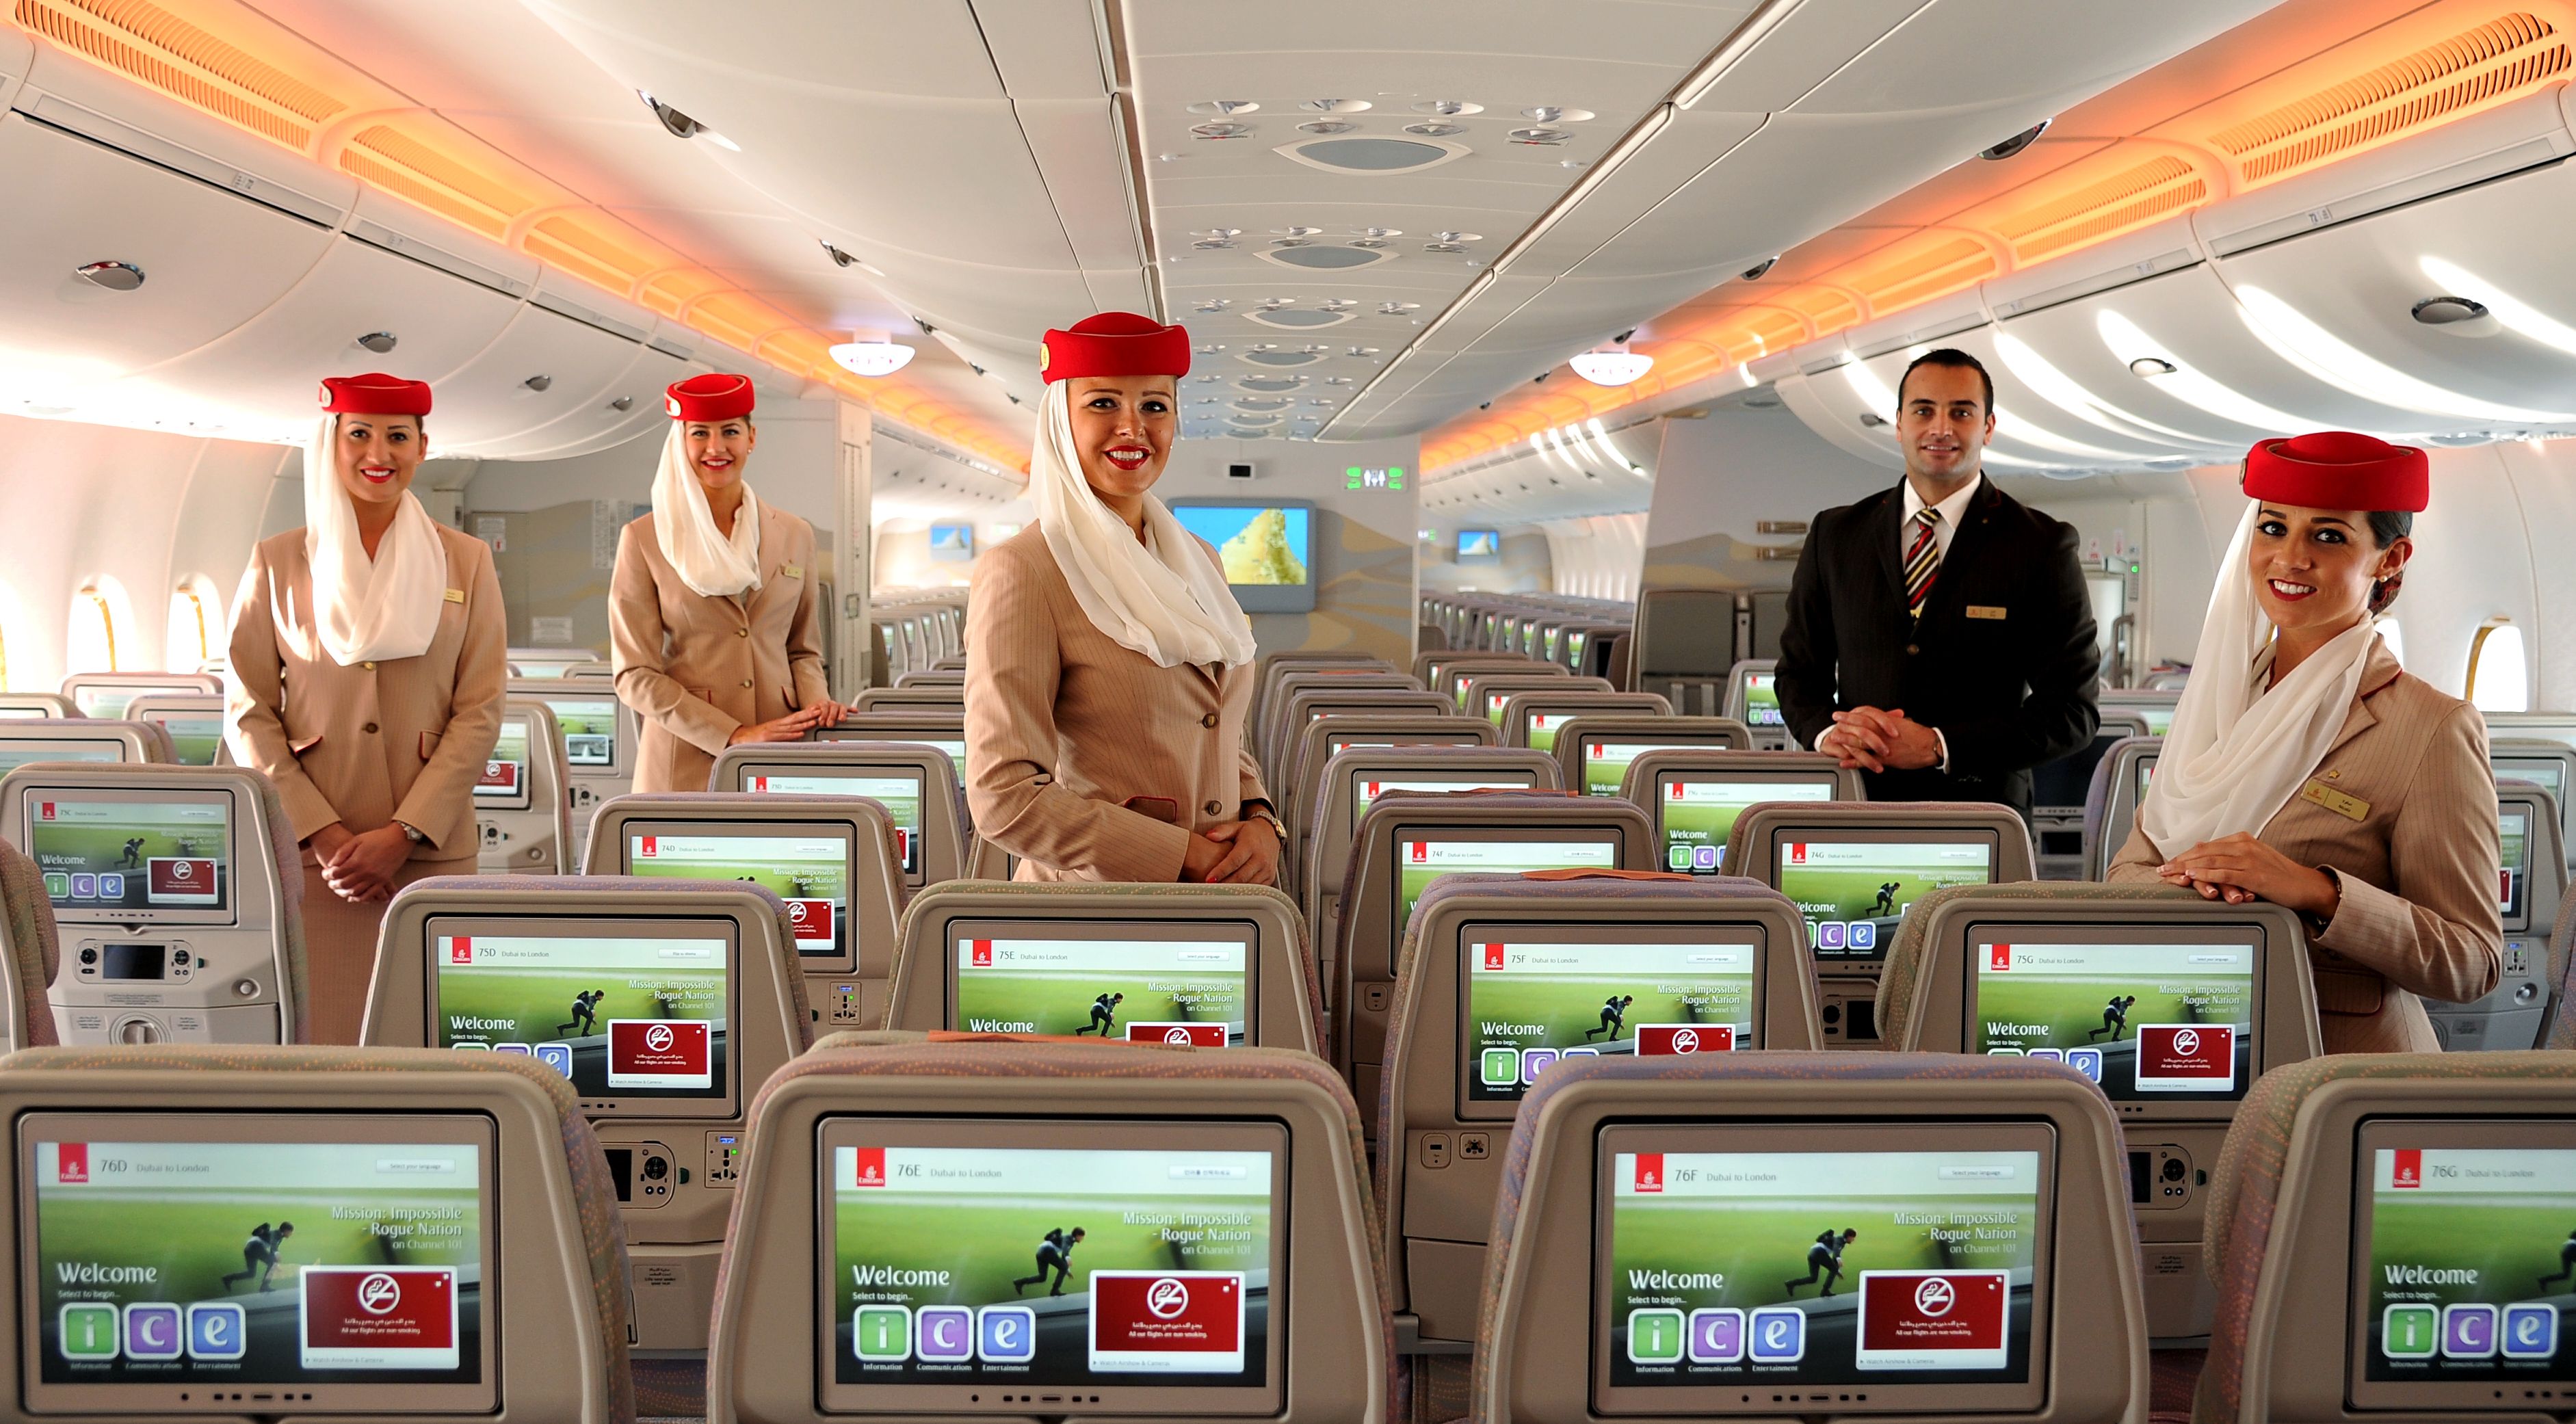 Emirates cabin crew standing in the aircraft cabin.